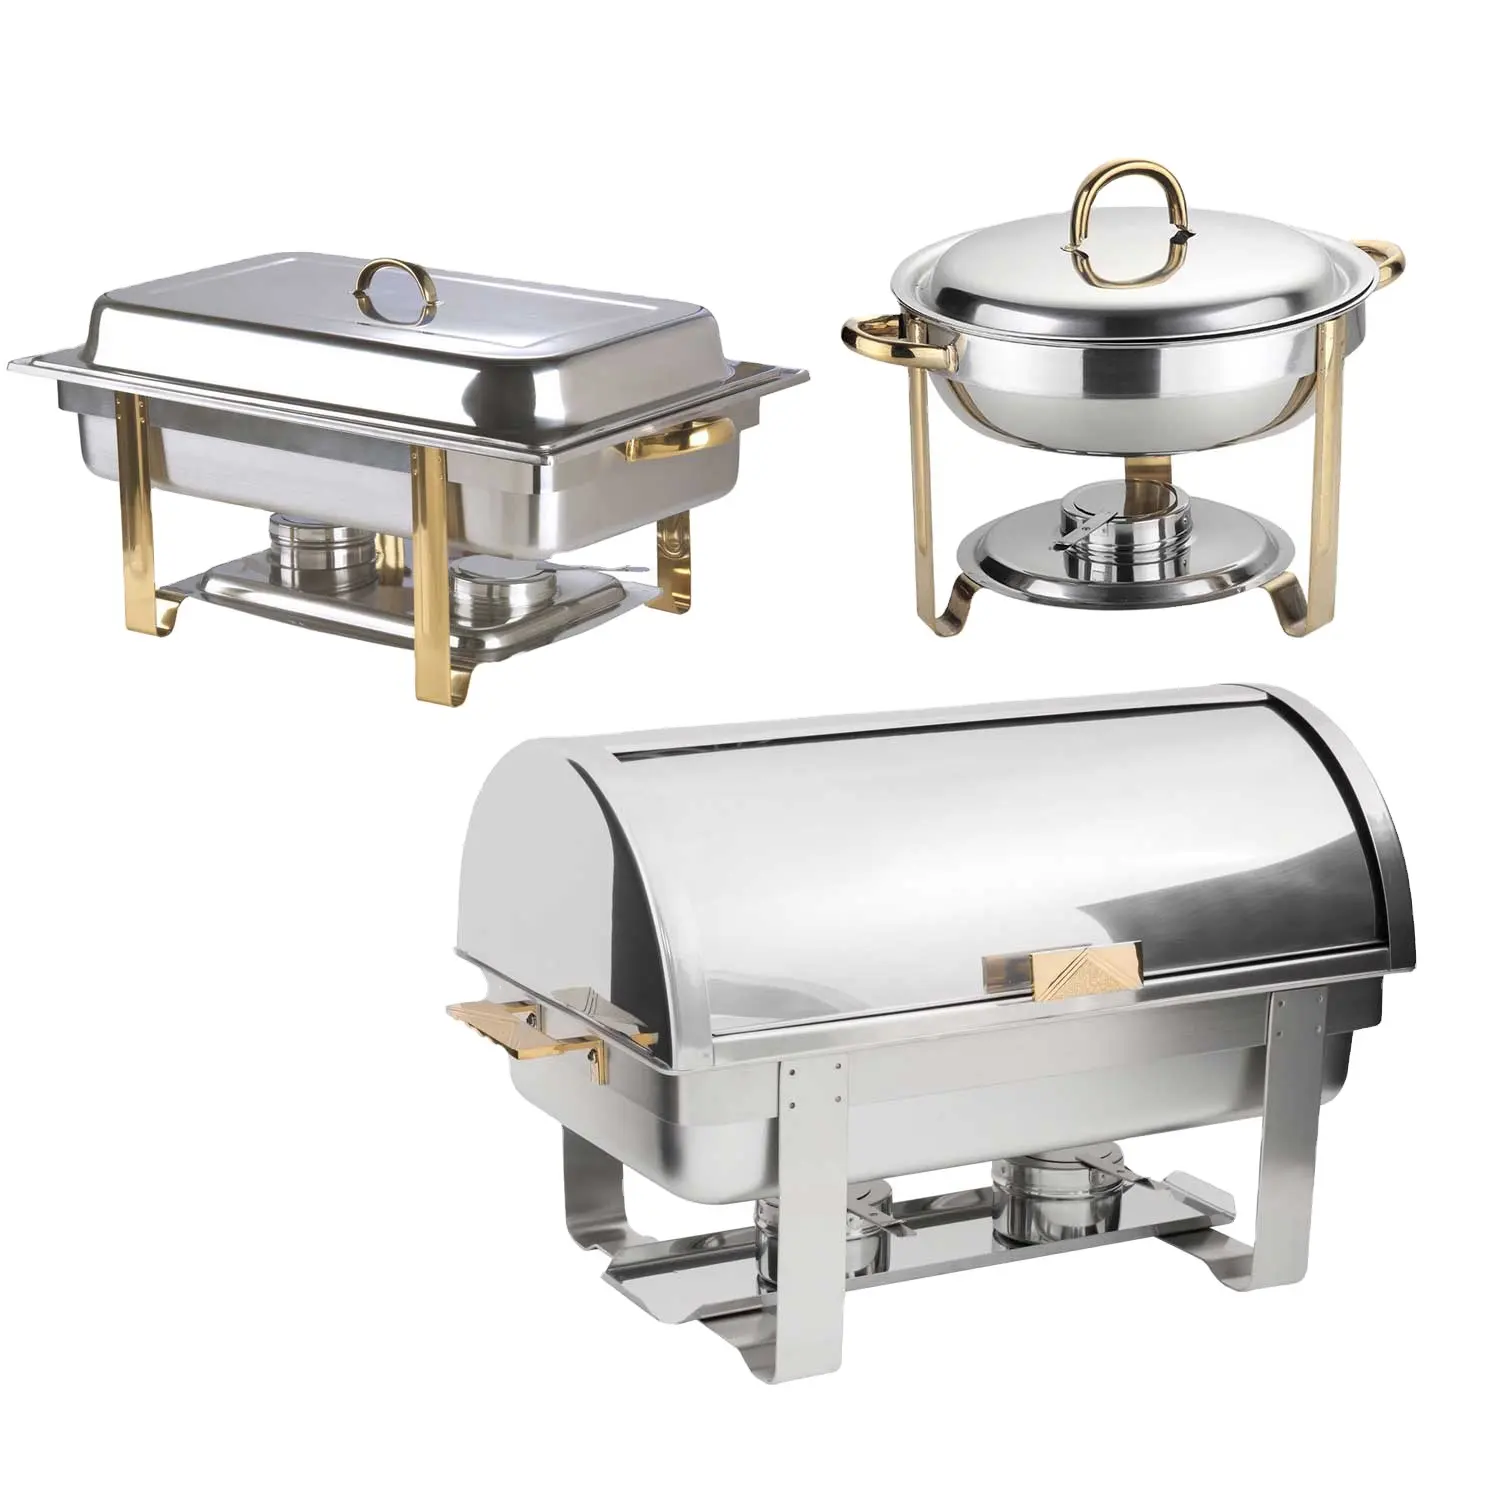 High Quality Buffet food Warmer Heater Chafing Dishes Stainless Steel Chafing Dish for Ctering Restaurant